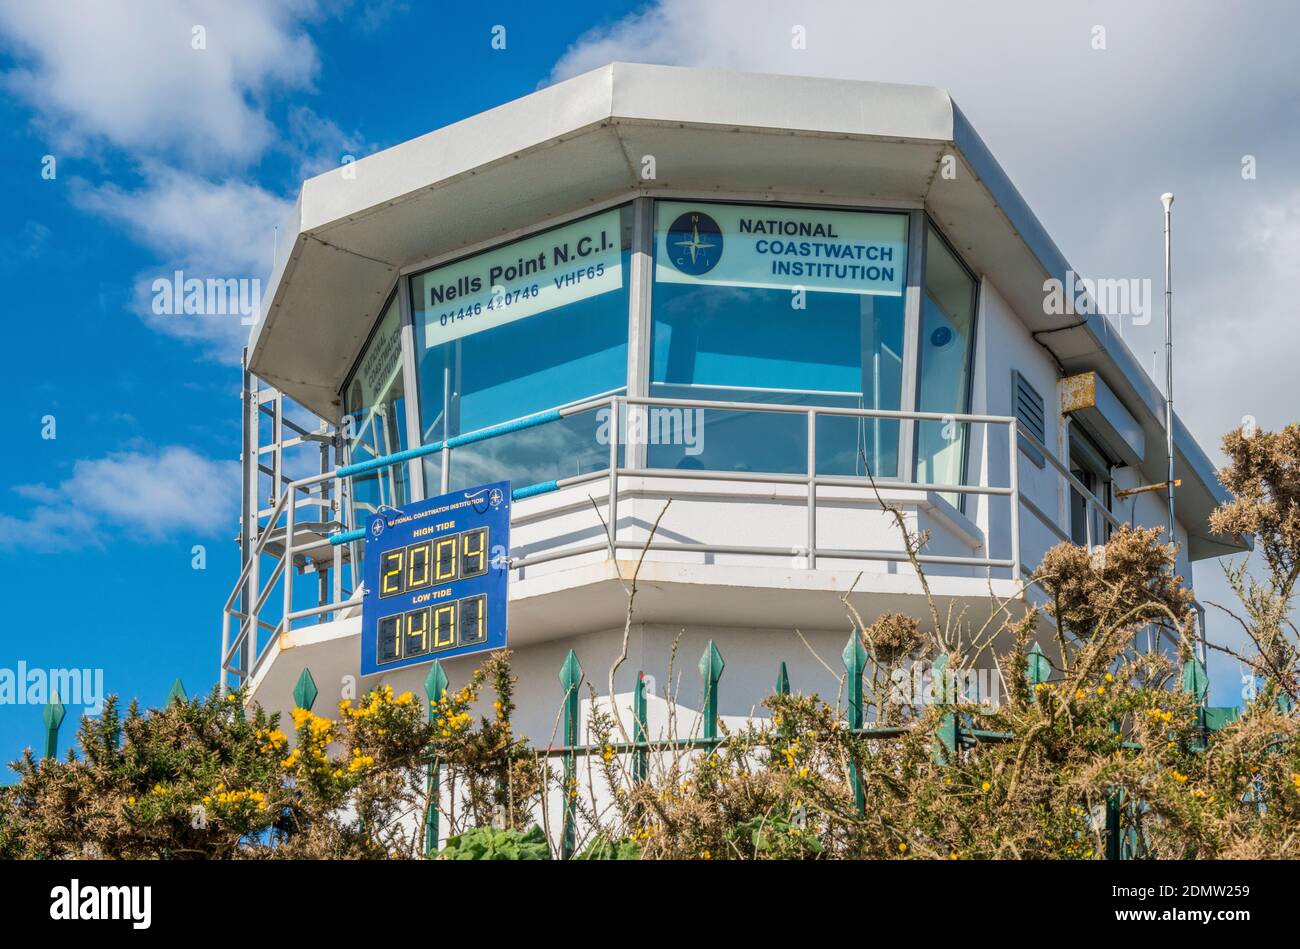 Nells Point National Coastwatch Institution on Barry Island South Wales, UK Stock Photo